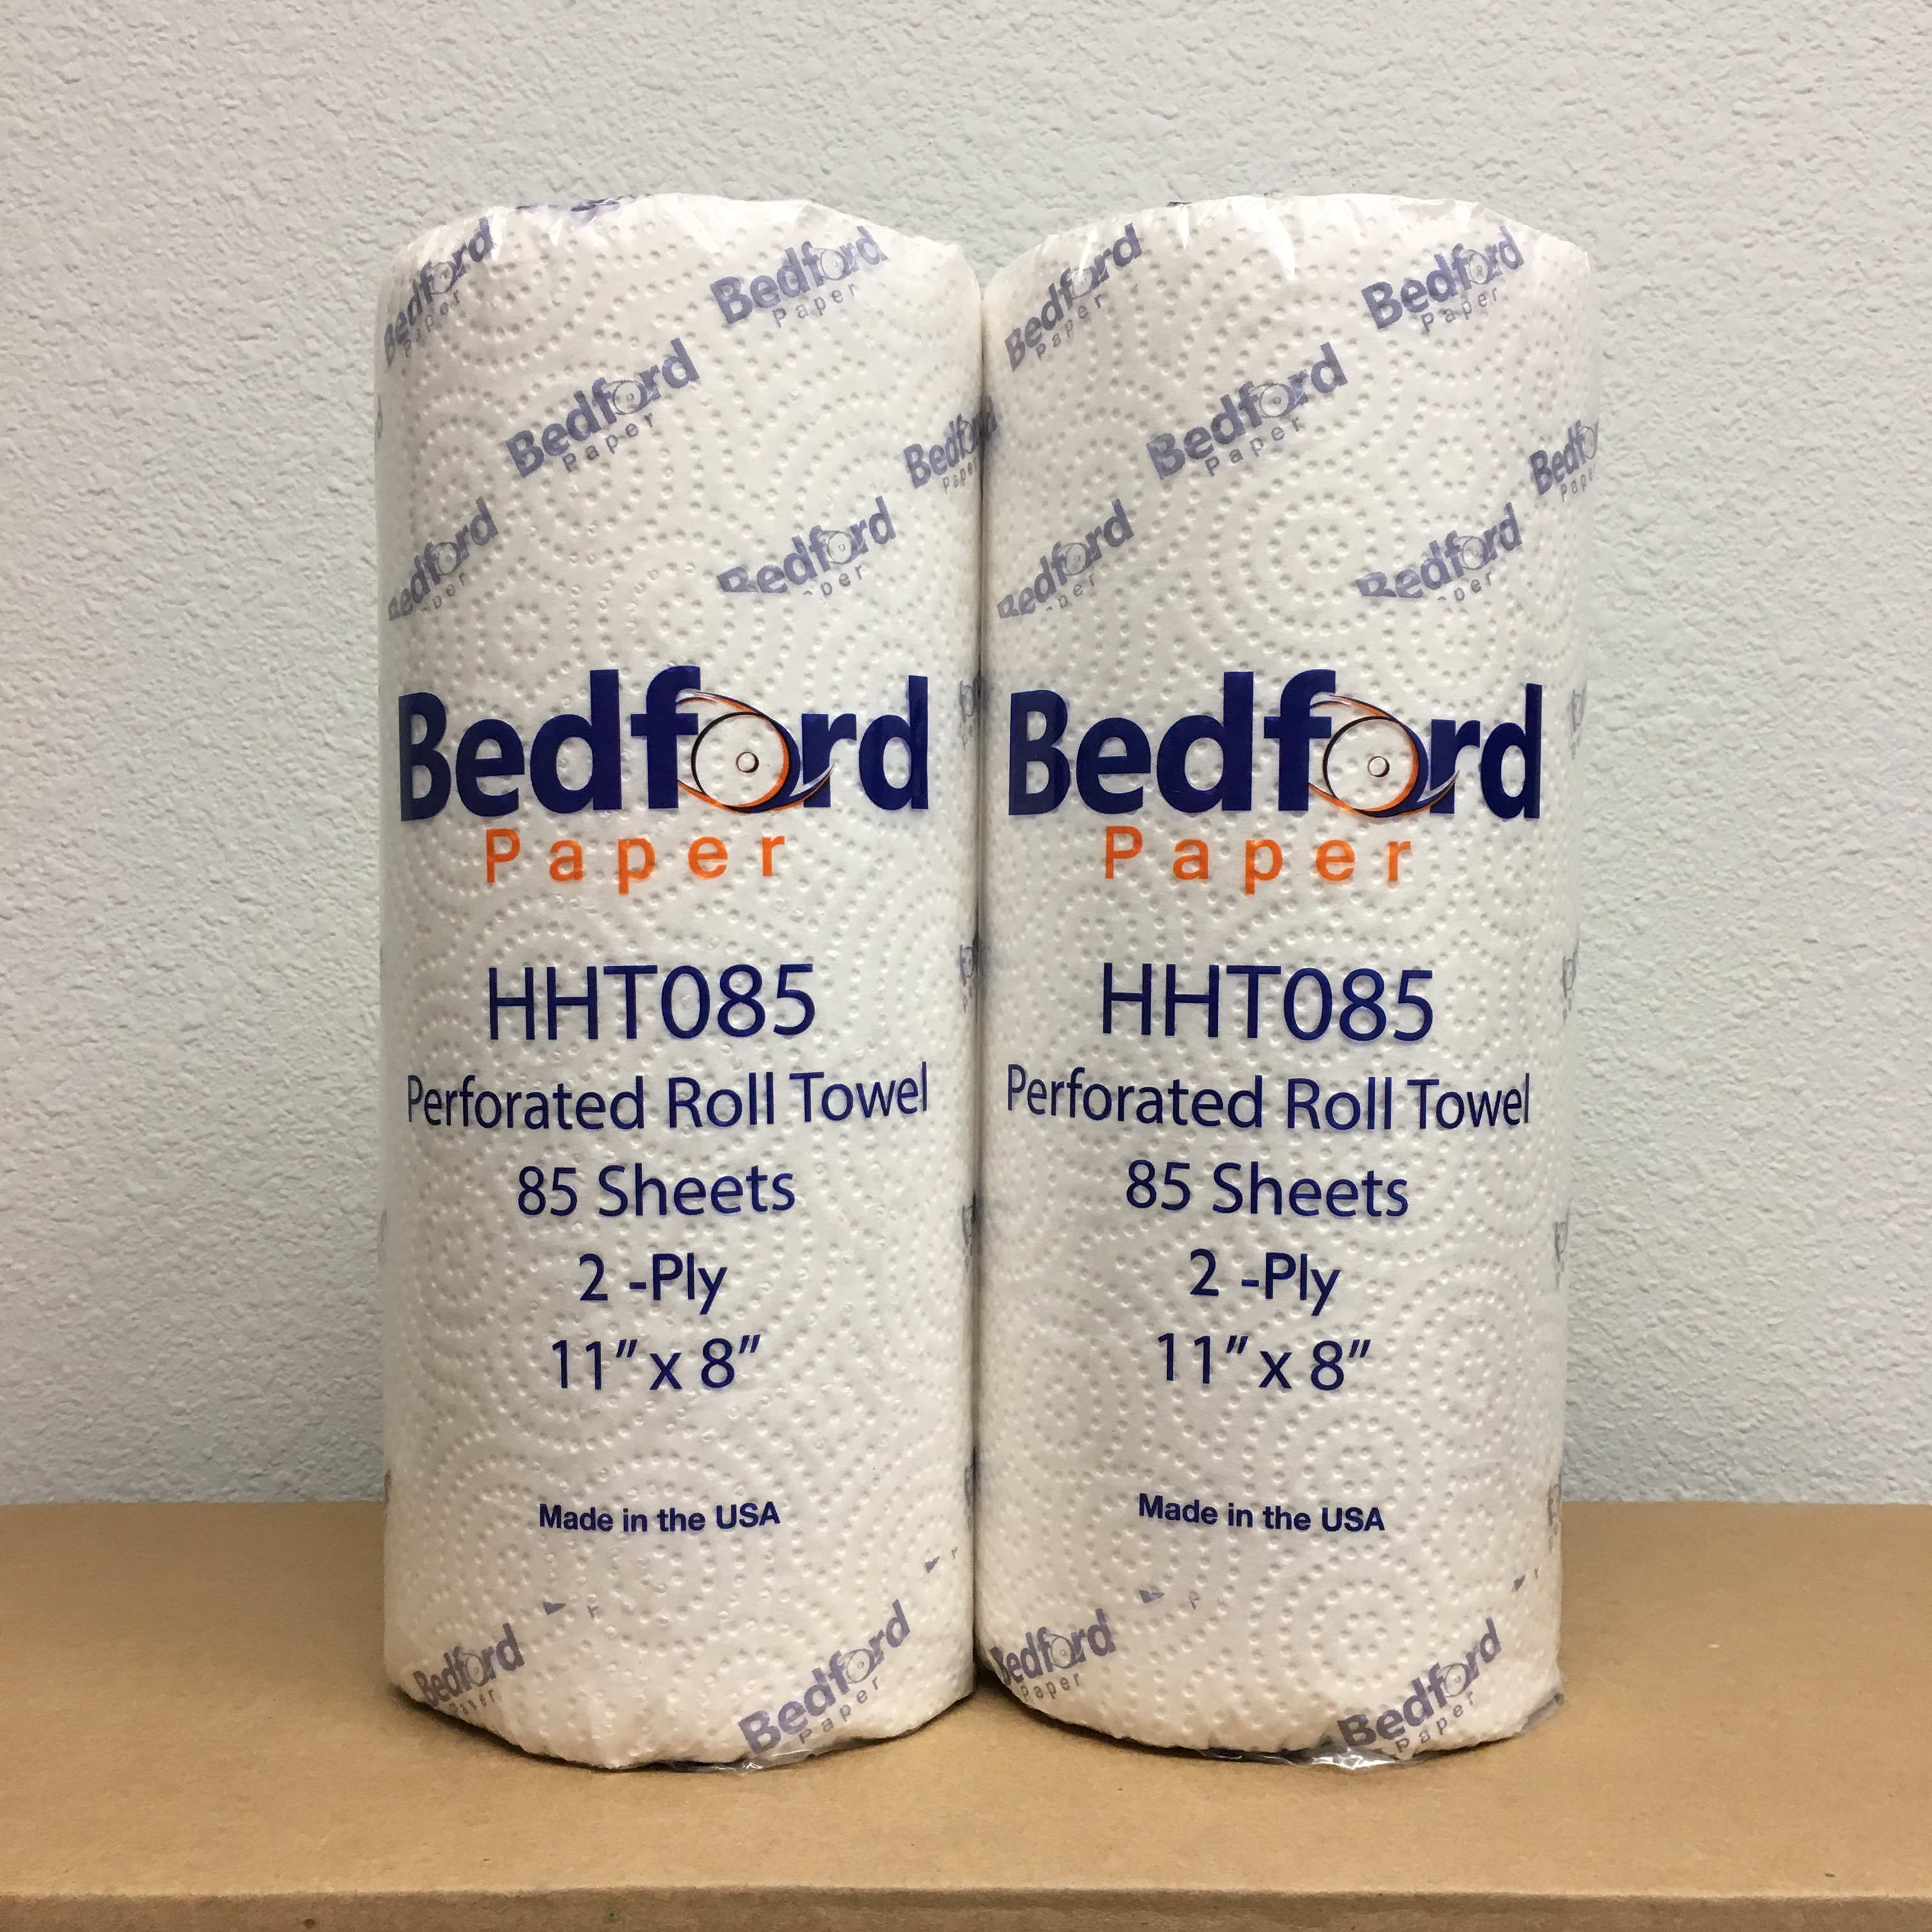 KITCHEN ROLL TOWEL BEDFORD 11 X 8 30 ROLLS OF 85 SHEETS